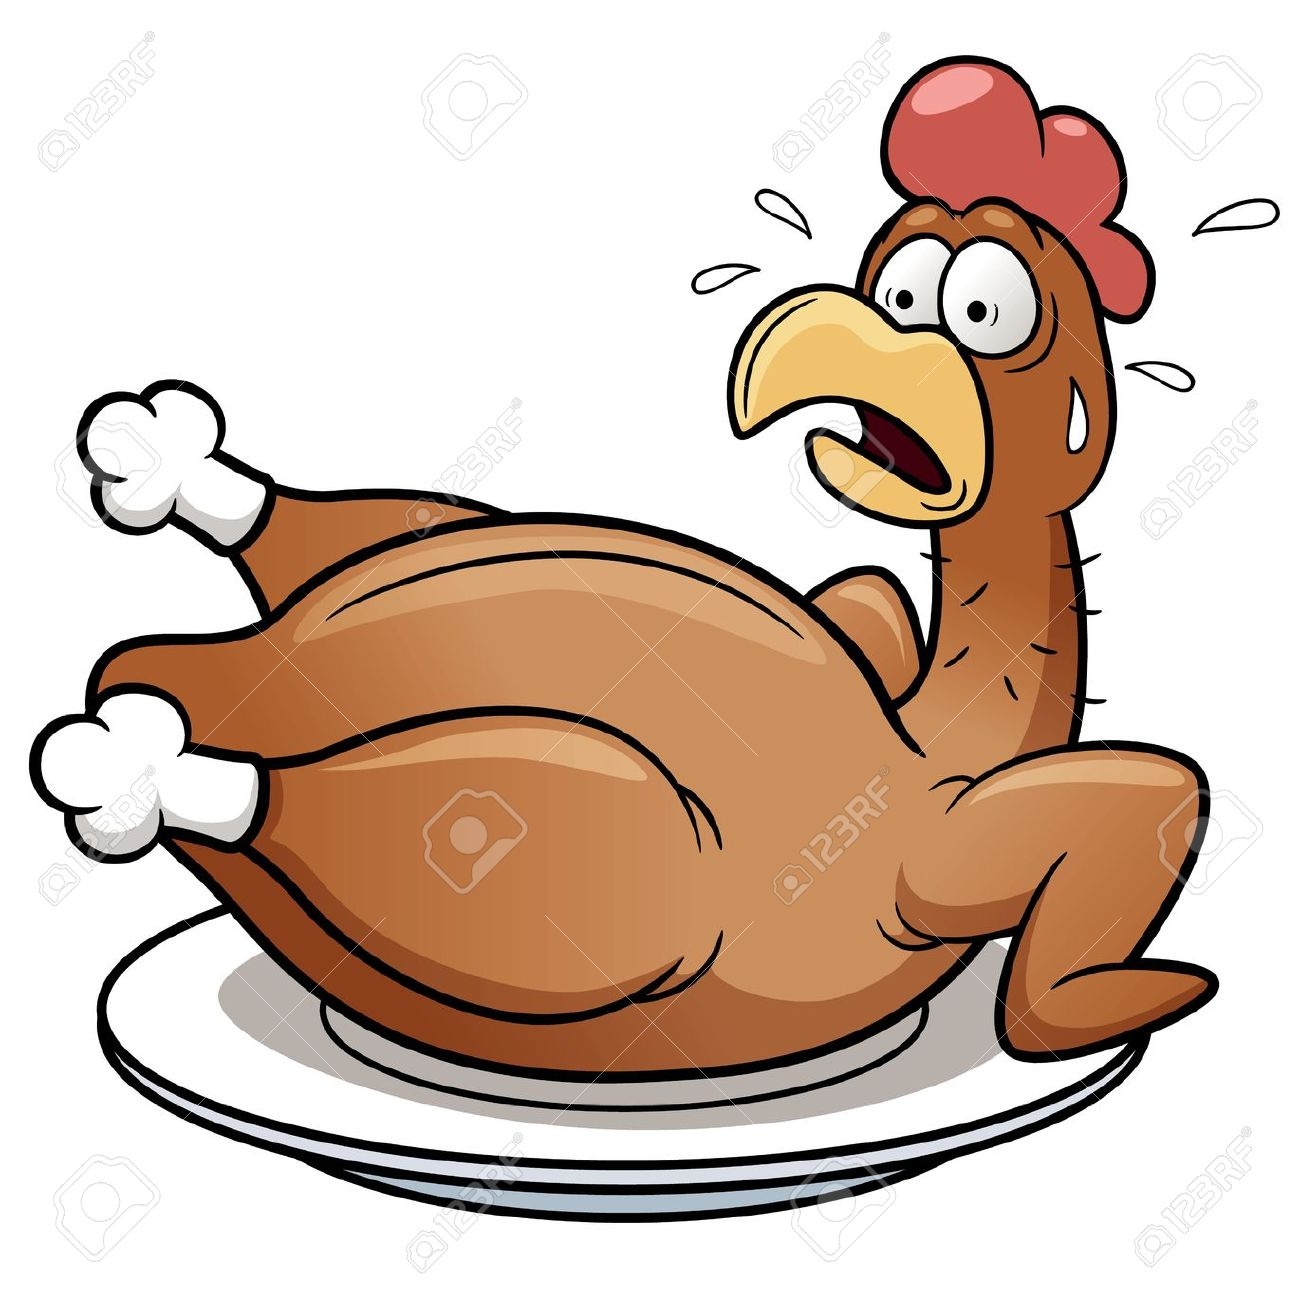 Baked chicken clipart - Clipground